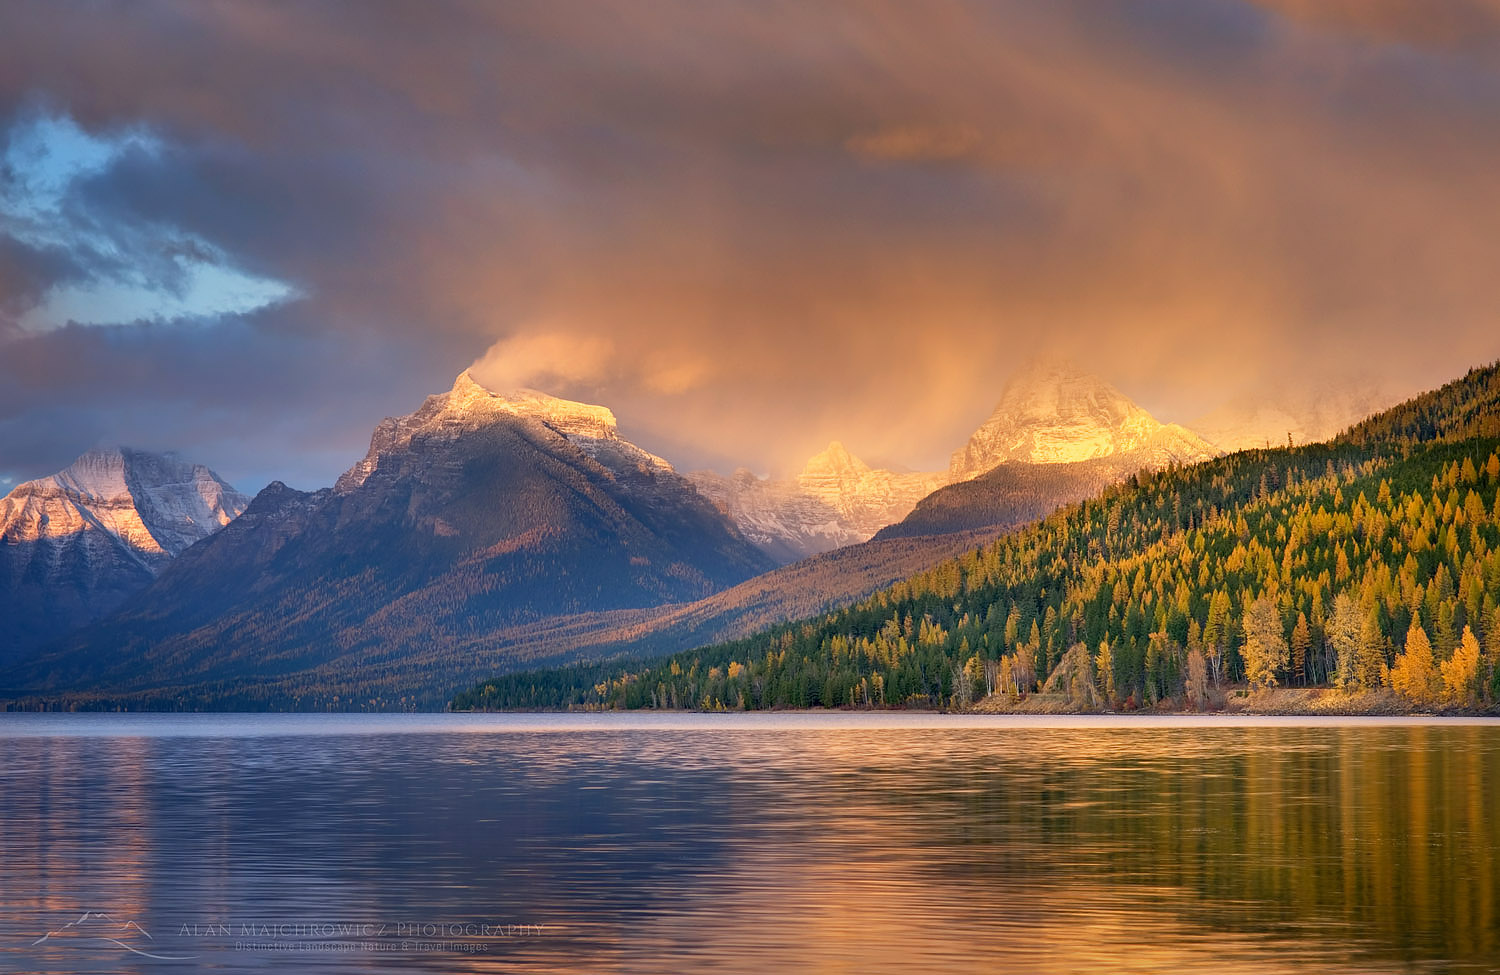 Curtains of rain showers from a passing autumn storm glow in the evening light above Lake McDonald, Glacier National Park Montana #22797